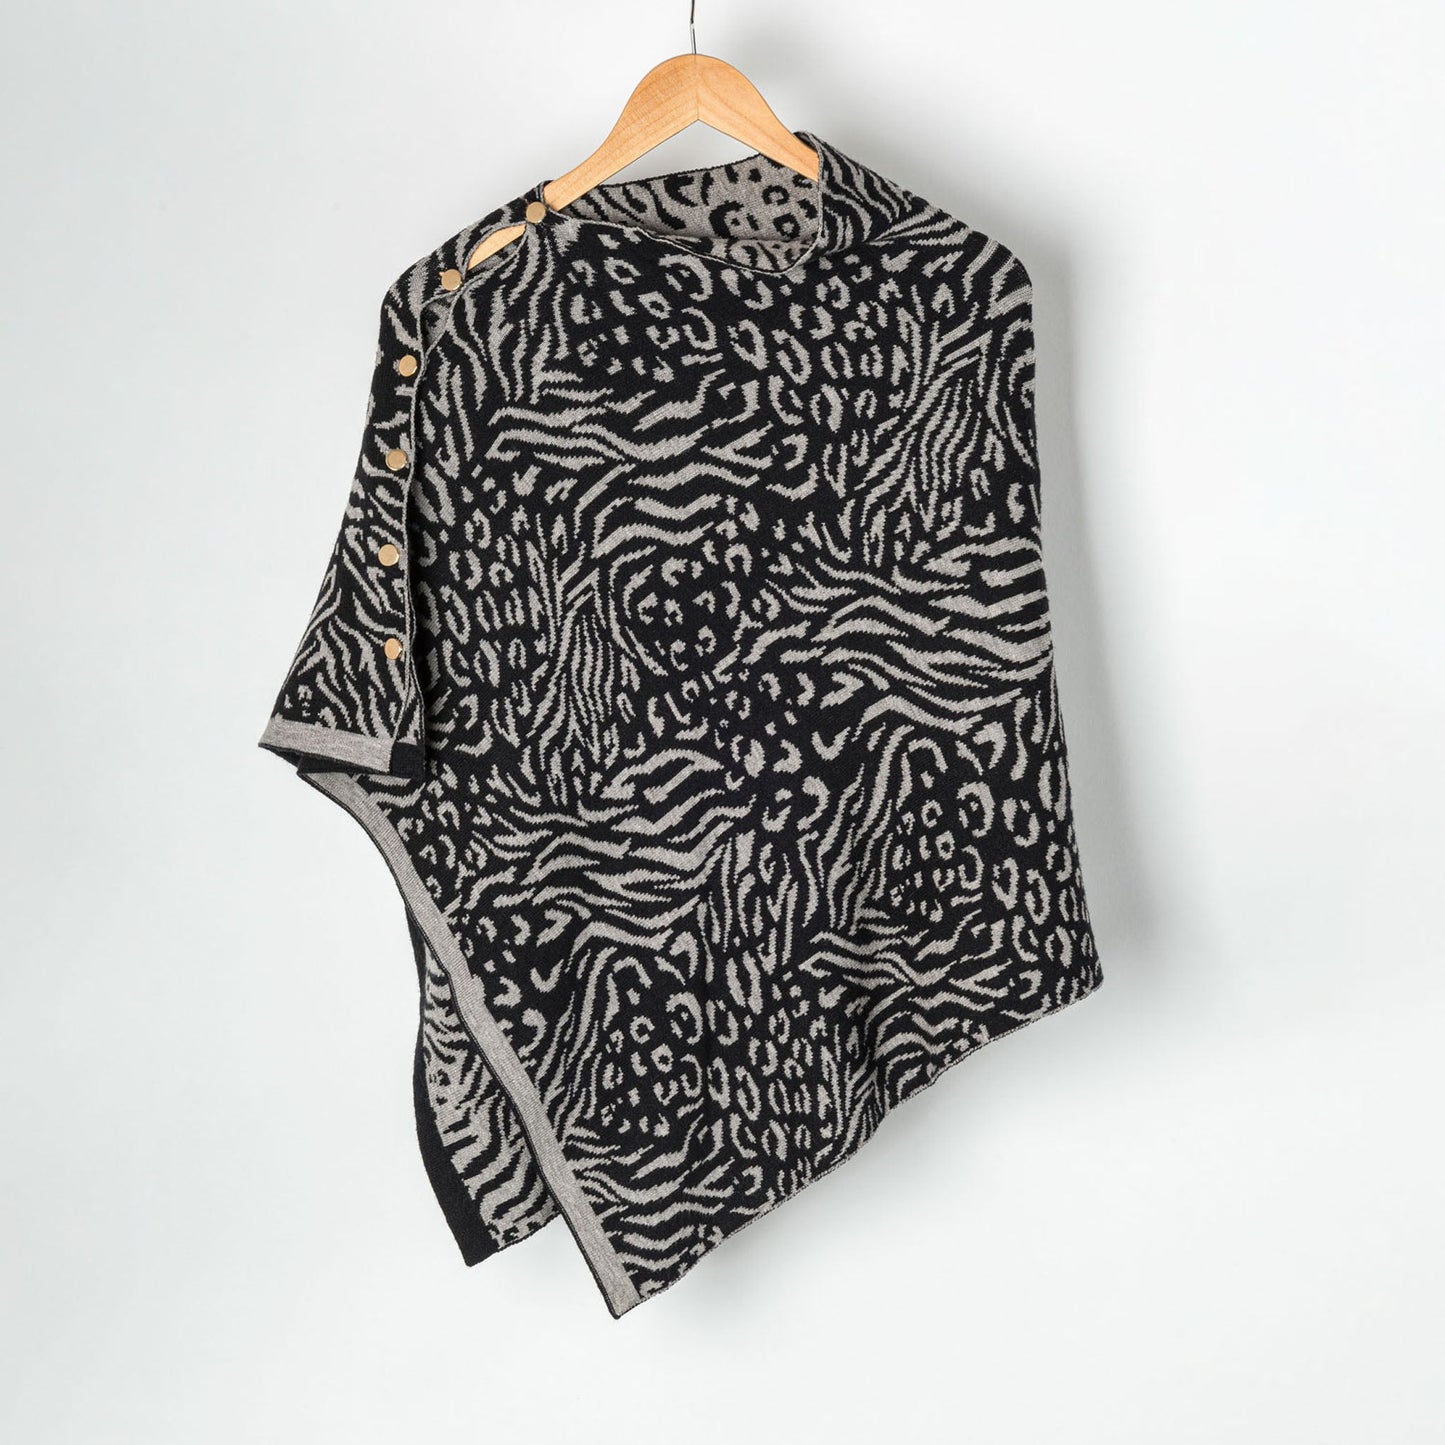 Black Animal Print Reversible Poncho With Gold Button Accents - Os